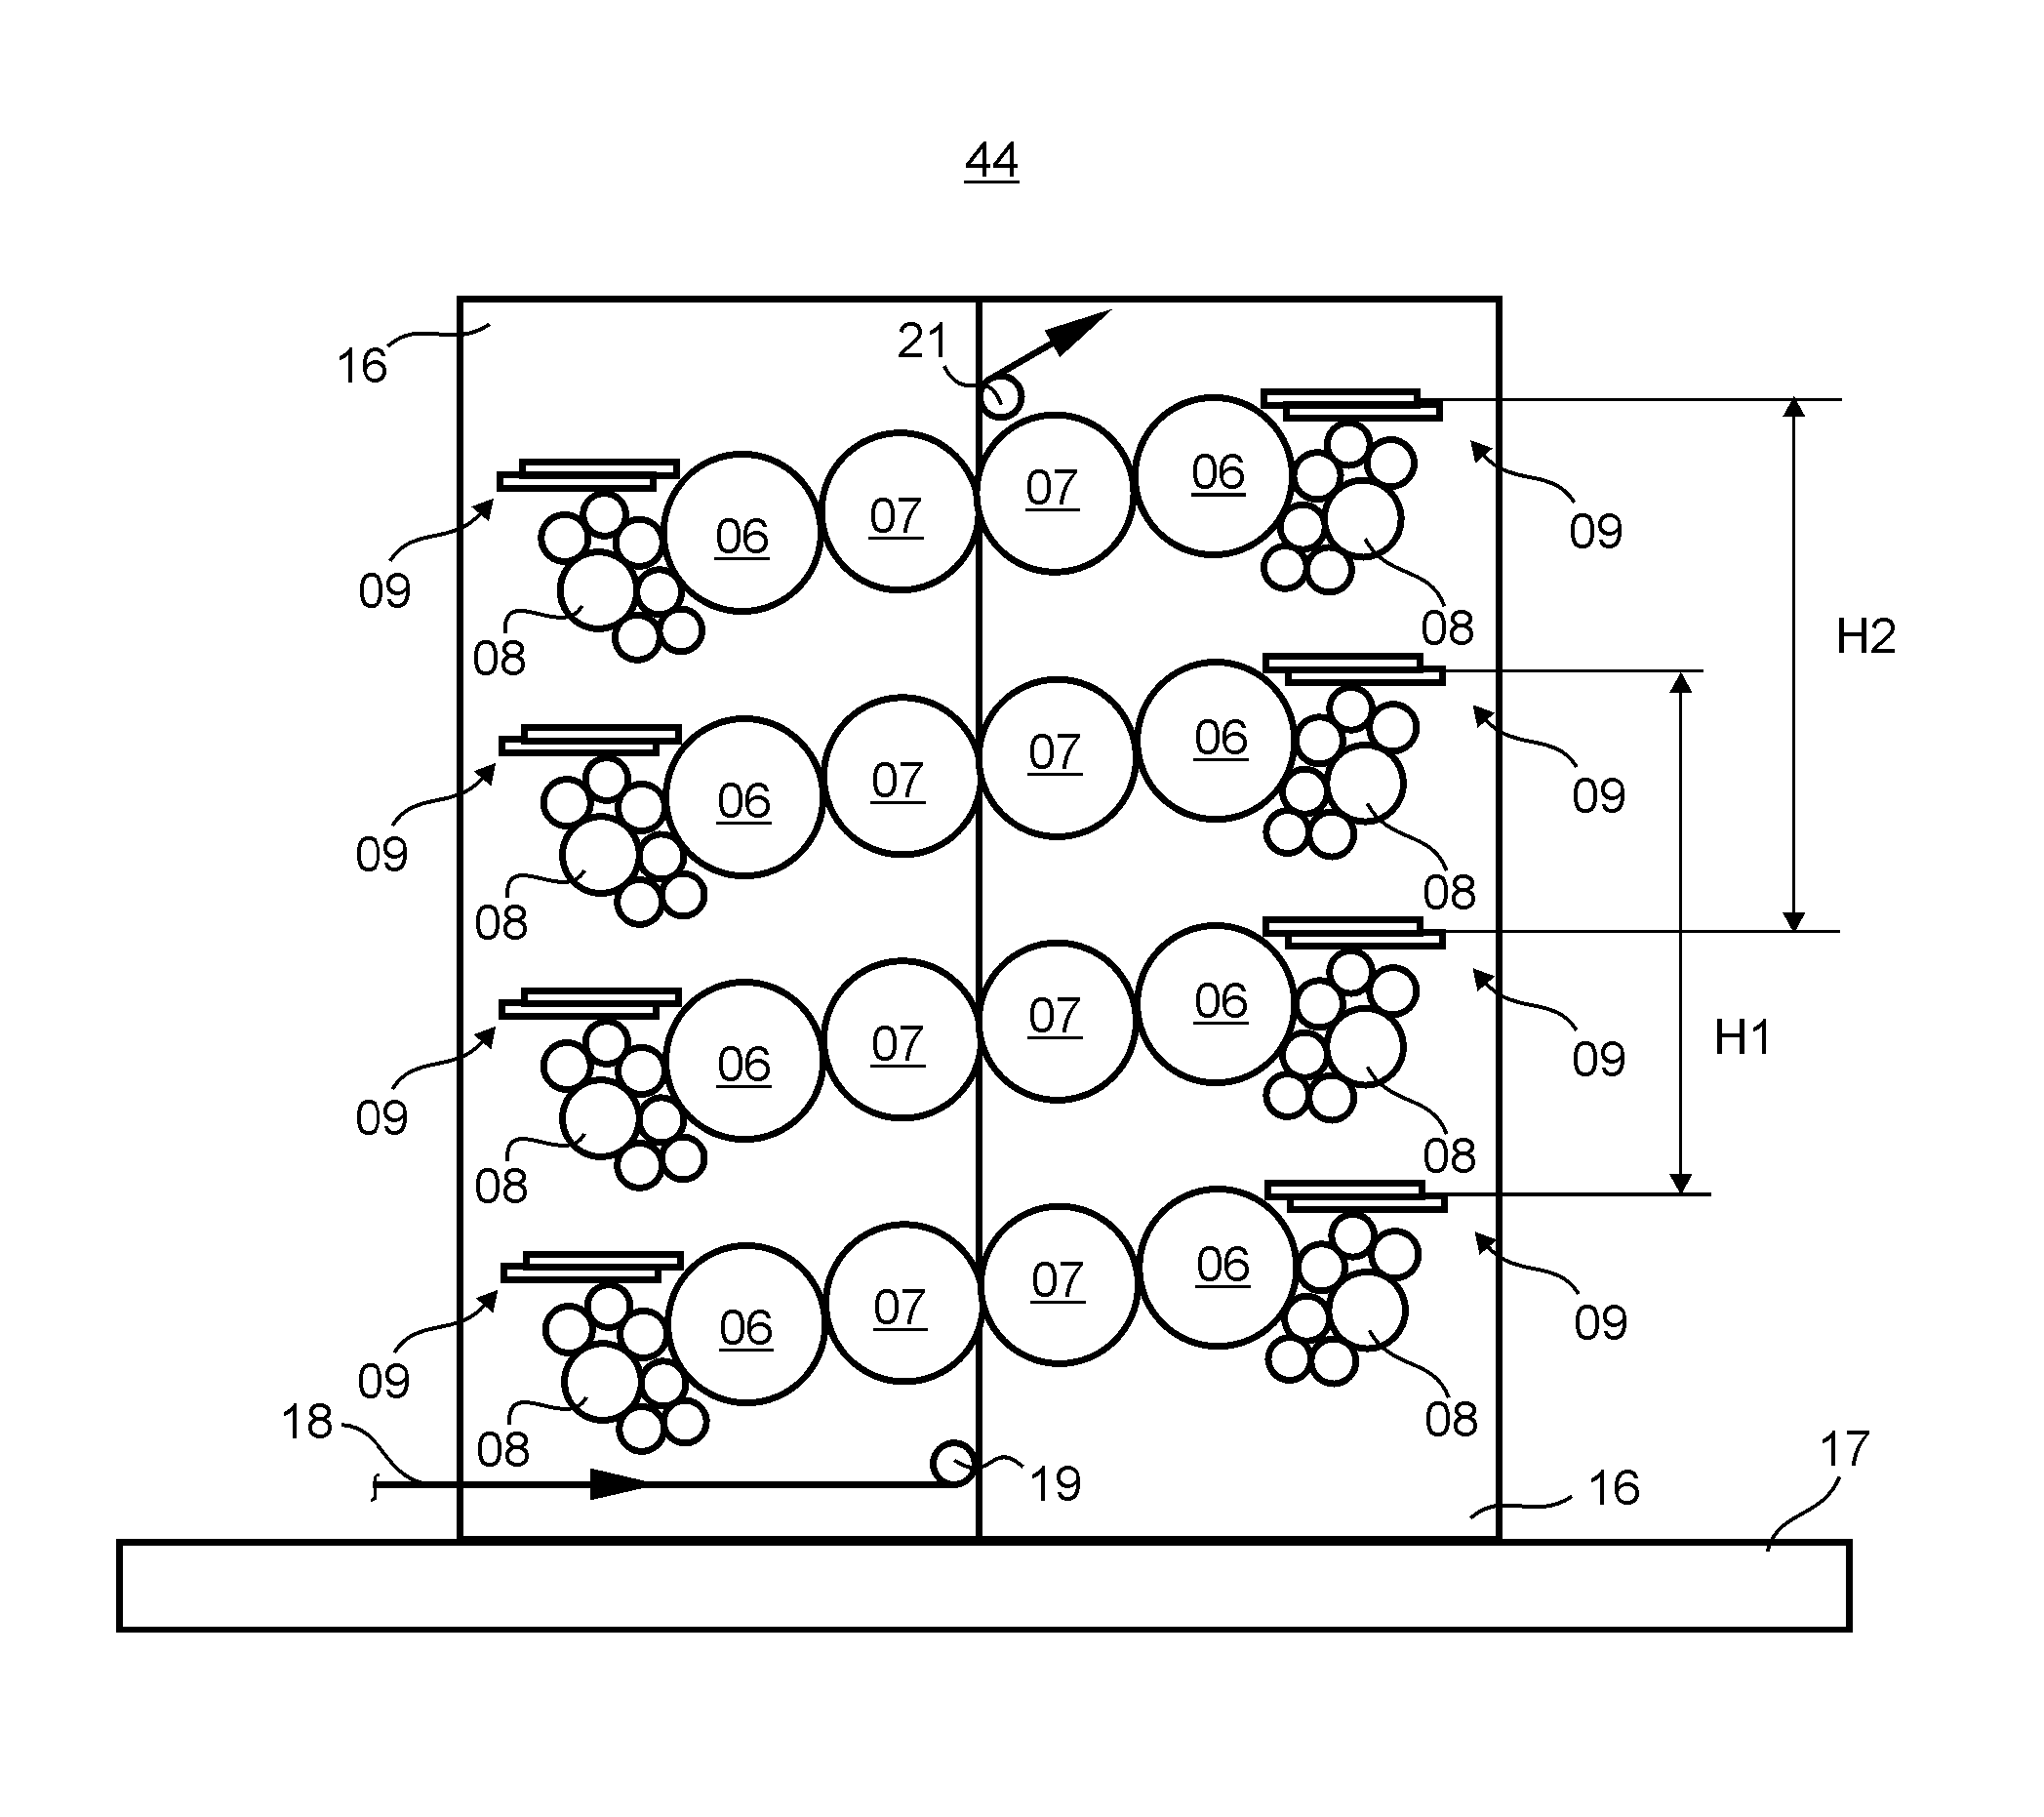 Method for providing printing formes at installation positions on one of a plurality of forme cylinders disposed in a printing press